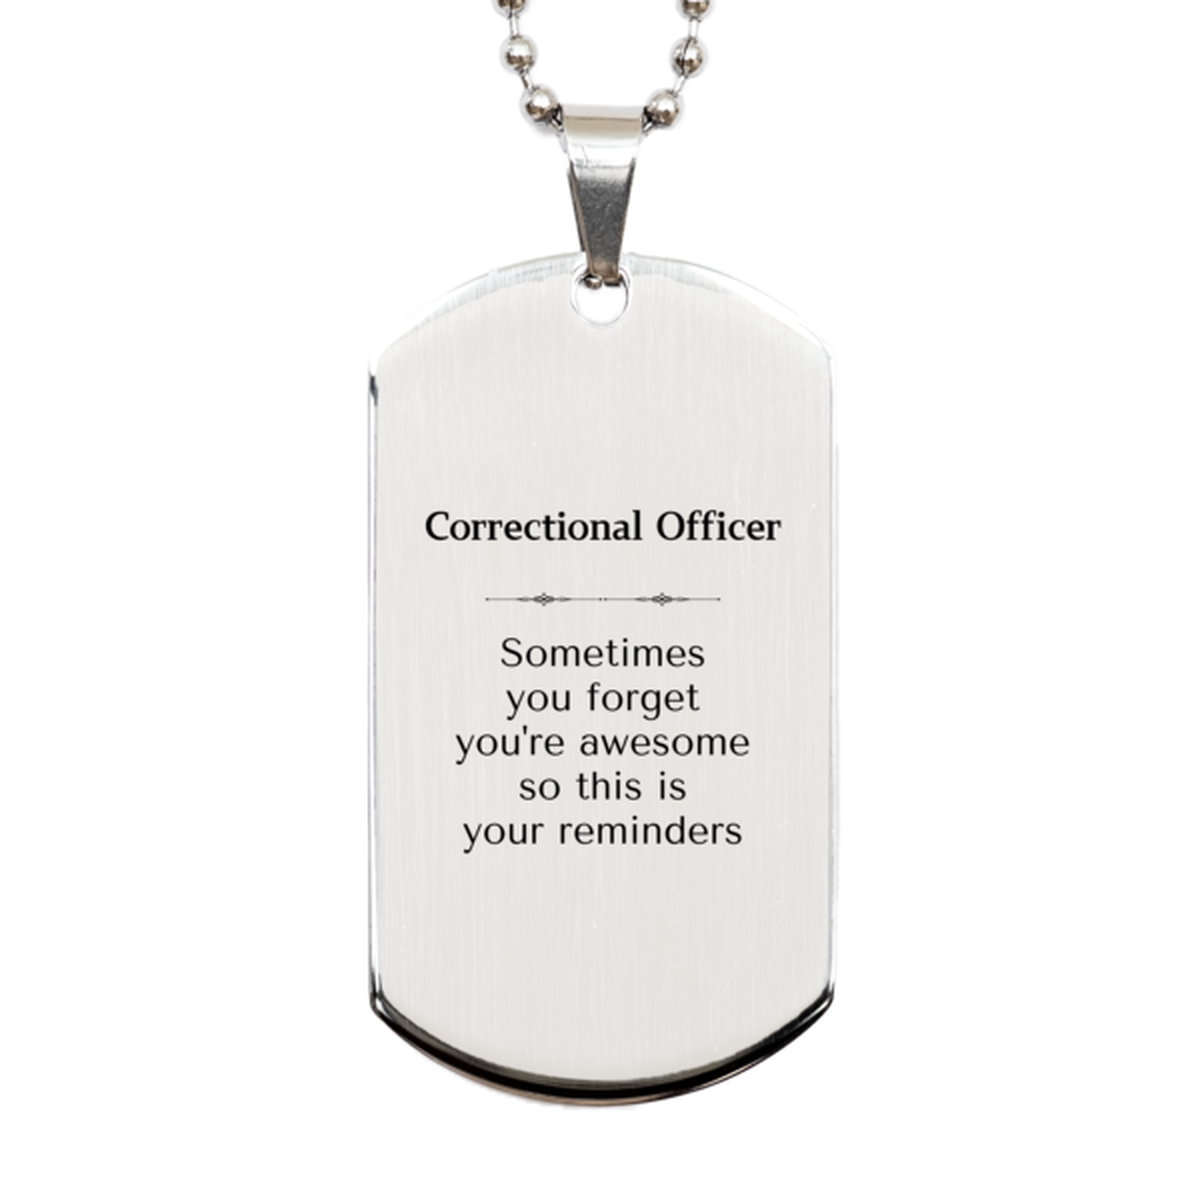 Sentimental Correctional Officer Silver Dog Tag, Correctional Officer Sometimes you forget you're awesome so this is your reminders, Graduation Christmas Birthday Gifts for Correctional Officer, Men, Women, Coworkers